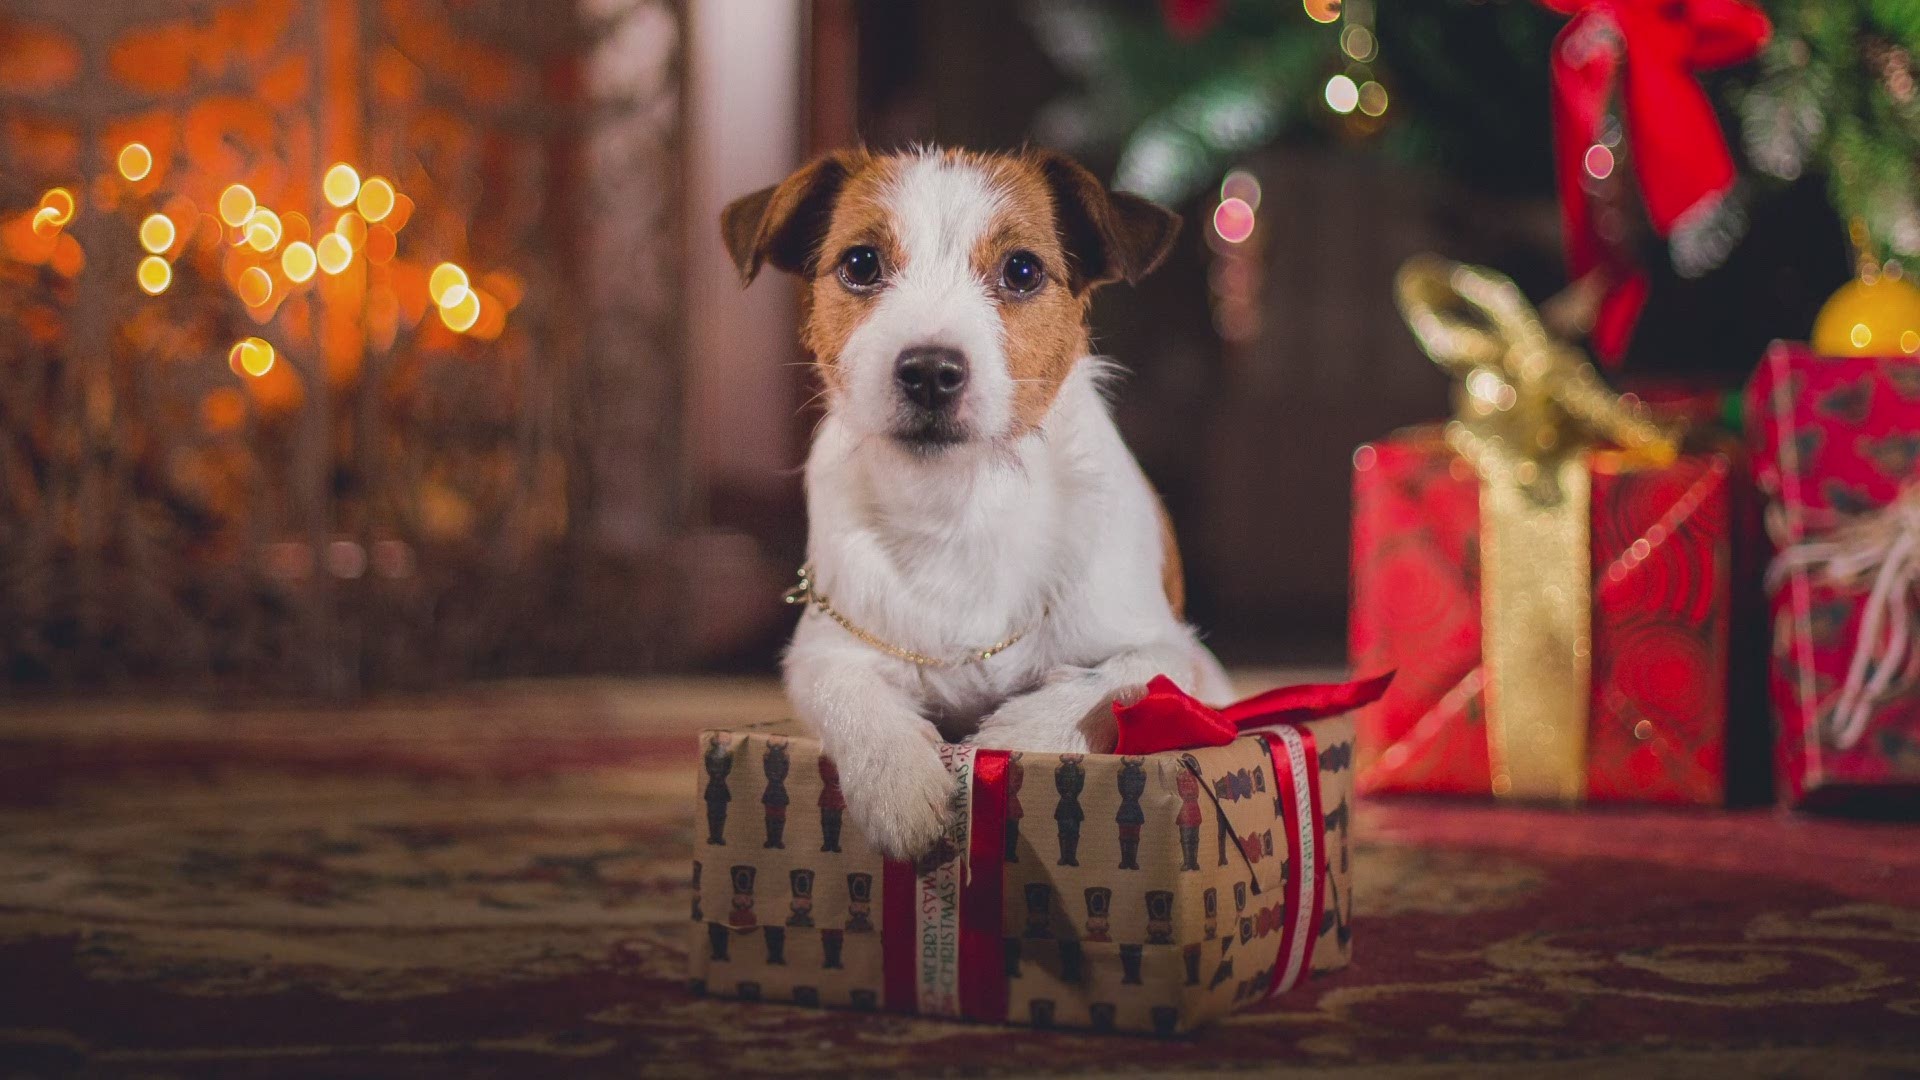 You see it all the time in movies and TV shows: people giving pets as a holiday gift. But, there's an unfortunate side-effect of gifting those cuddly surprises.